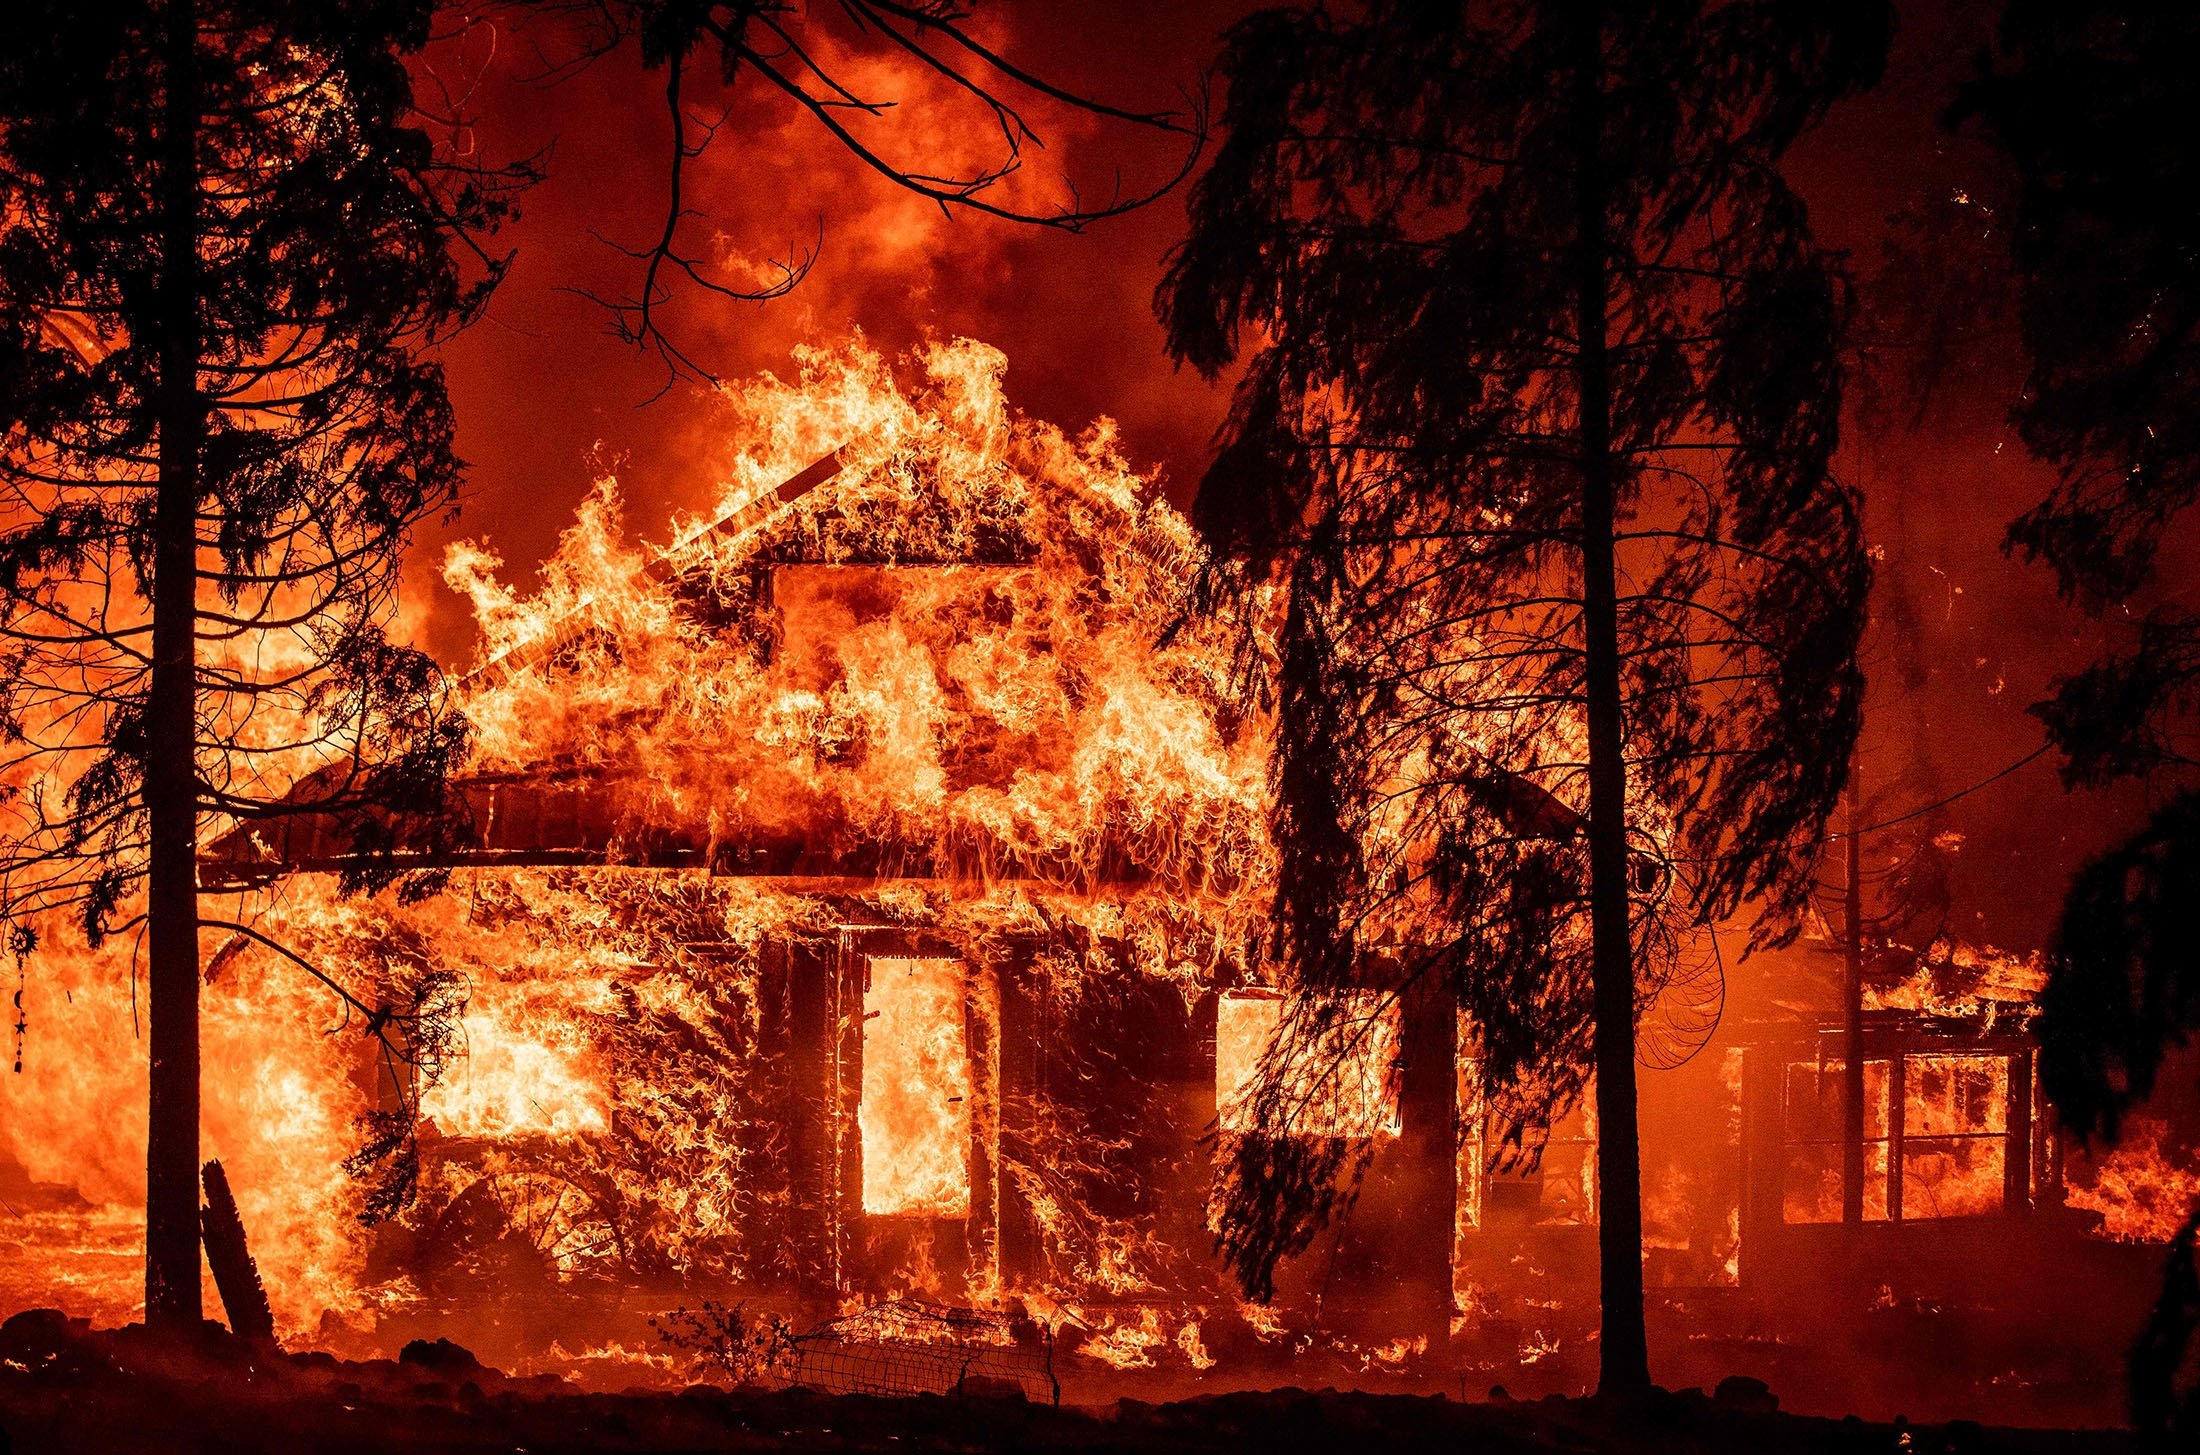 A home burns during the Dixie fire, in the Indian Falls neighborhood of unincorporated Plumas County, California, U.S., July 24, 2021. (AFP Photo)